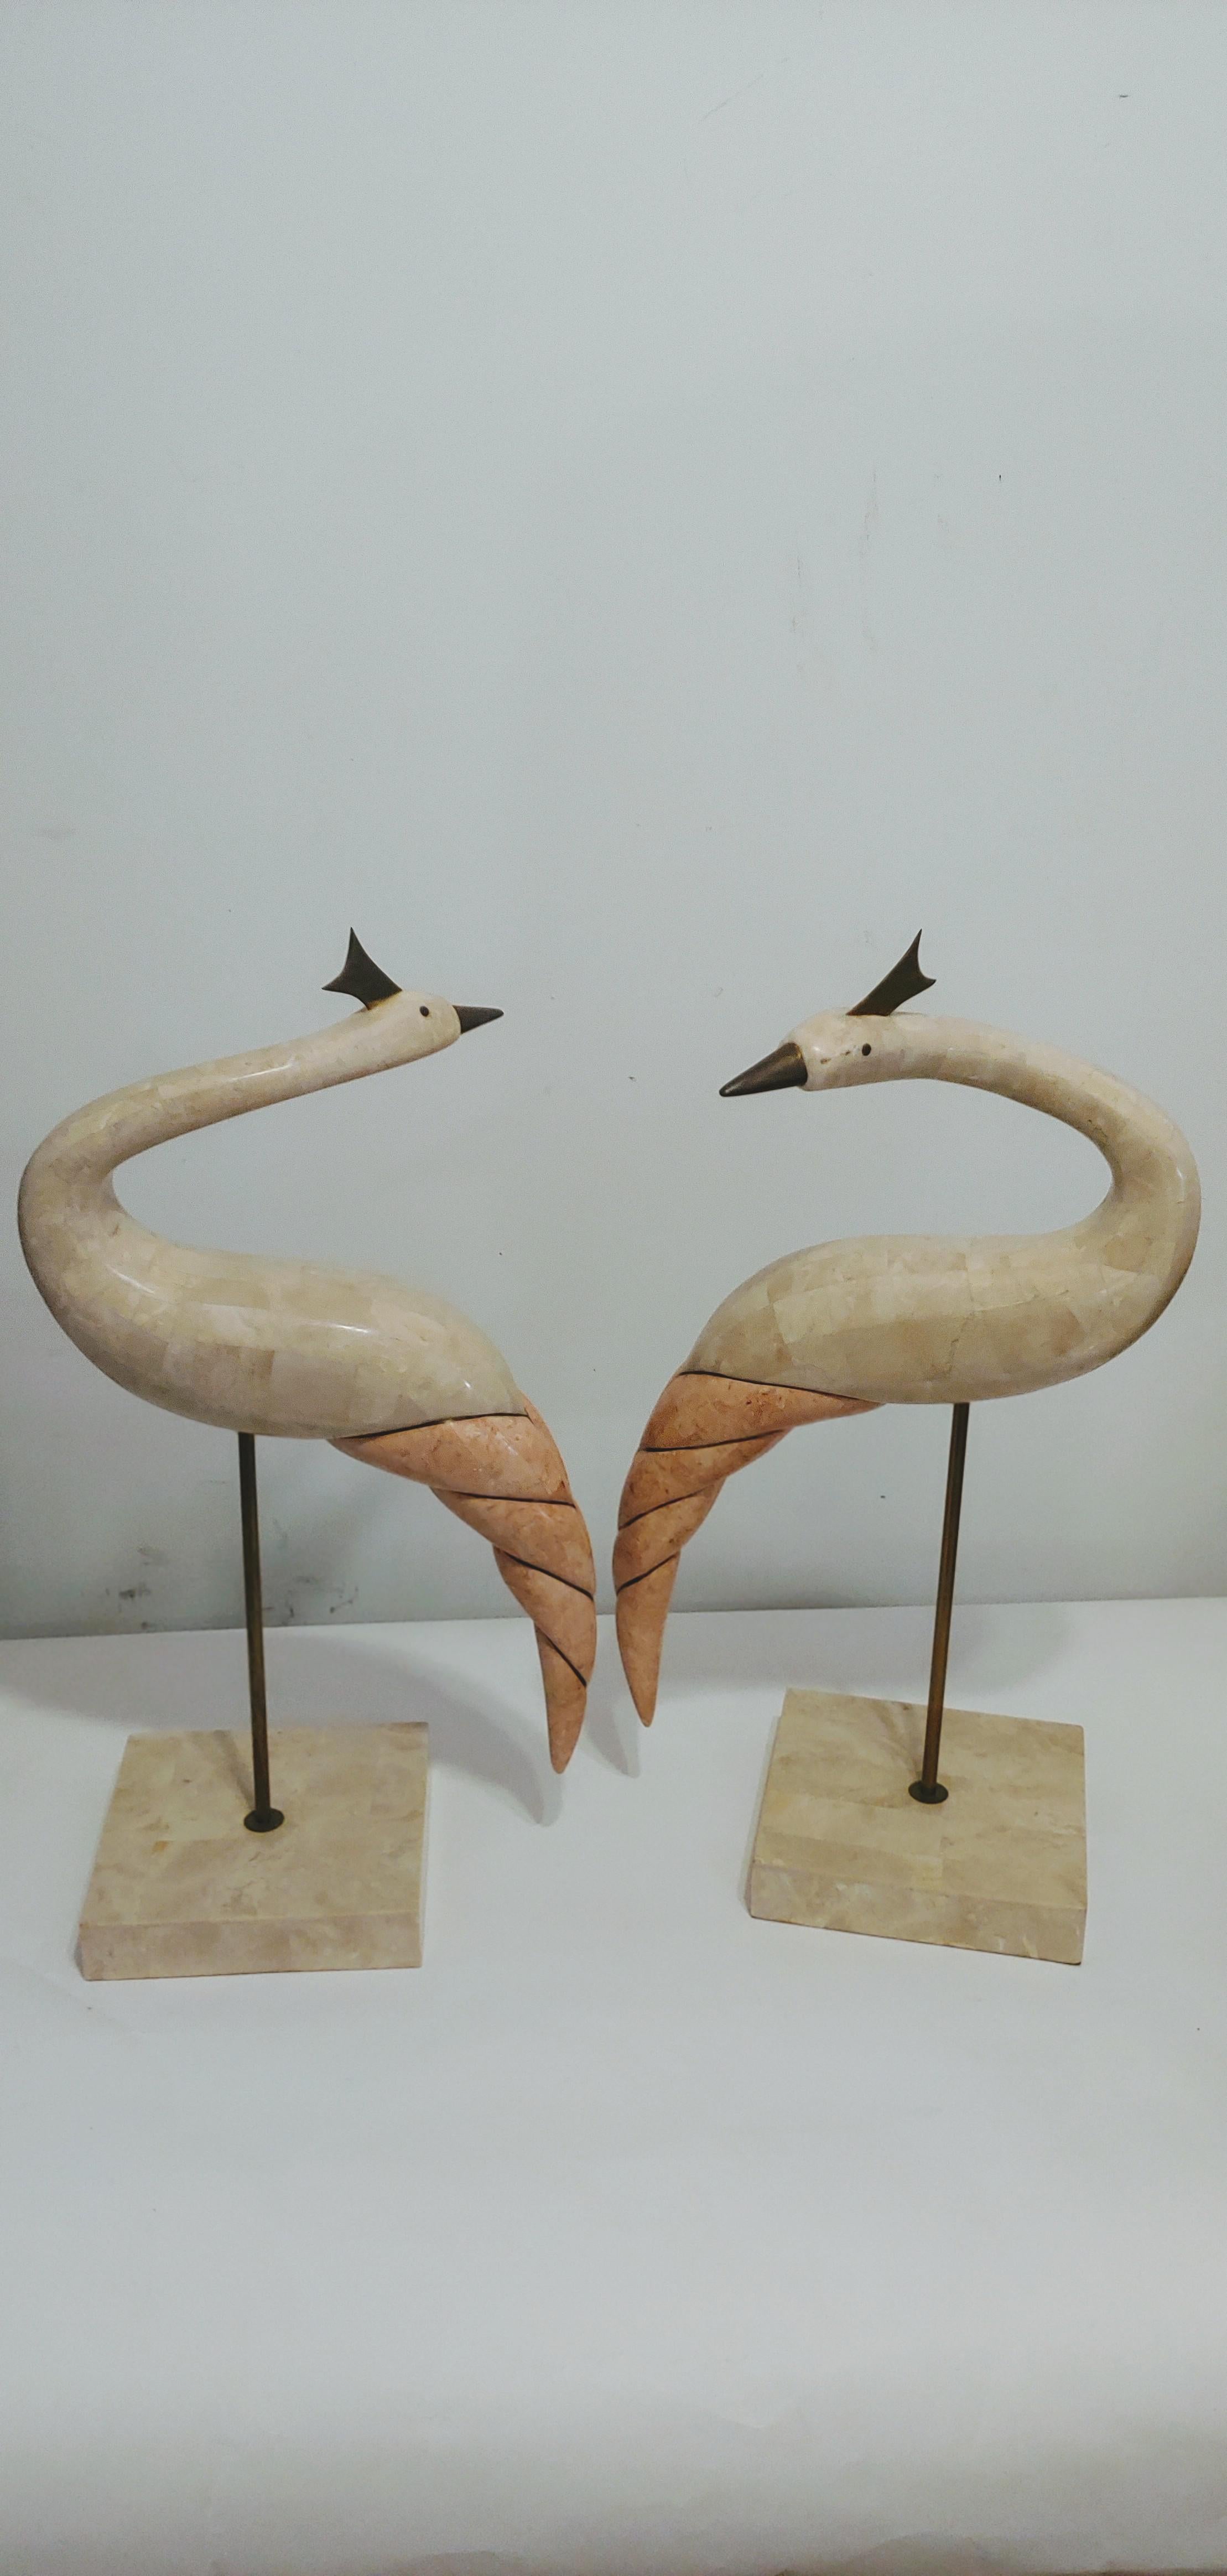 Tessellated stone and brass bird sculptures
Made in the 1970s.